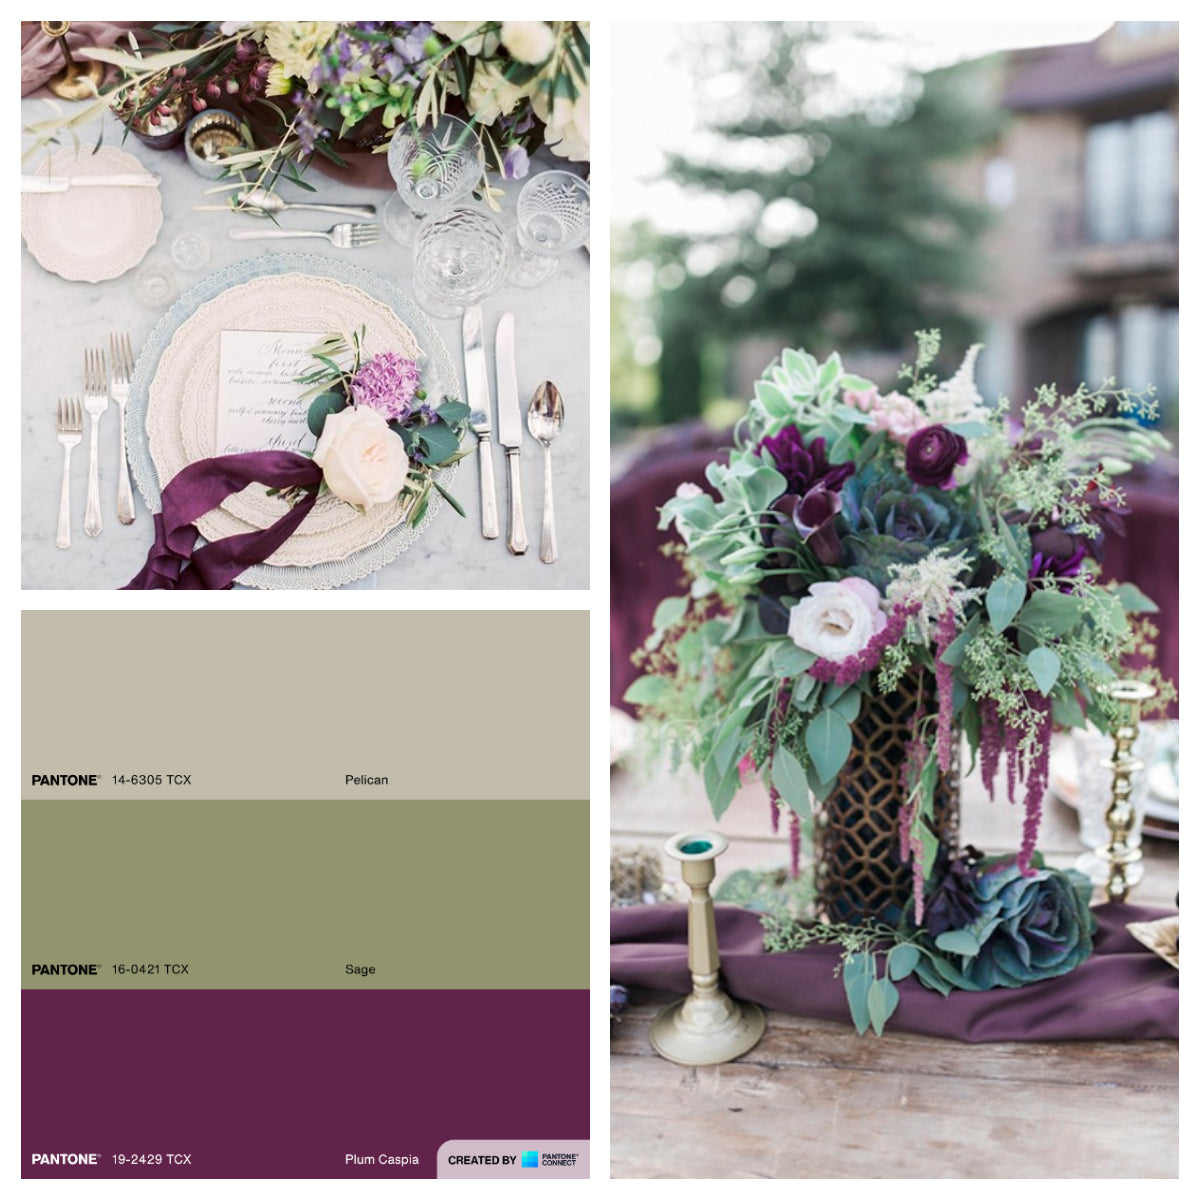 14 Wedding Color Schemes for Any Season - Wedding Color Palette Ideas